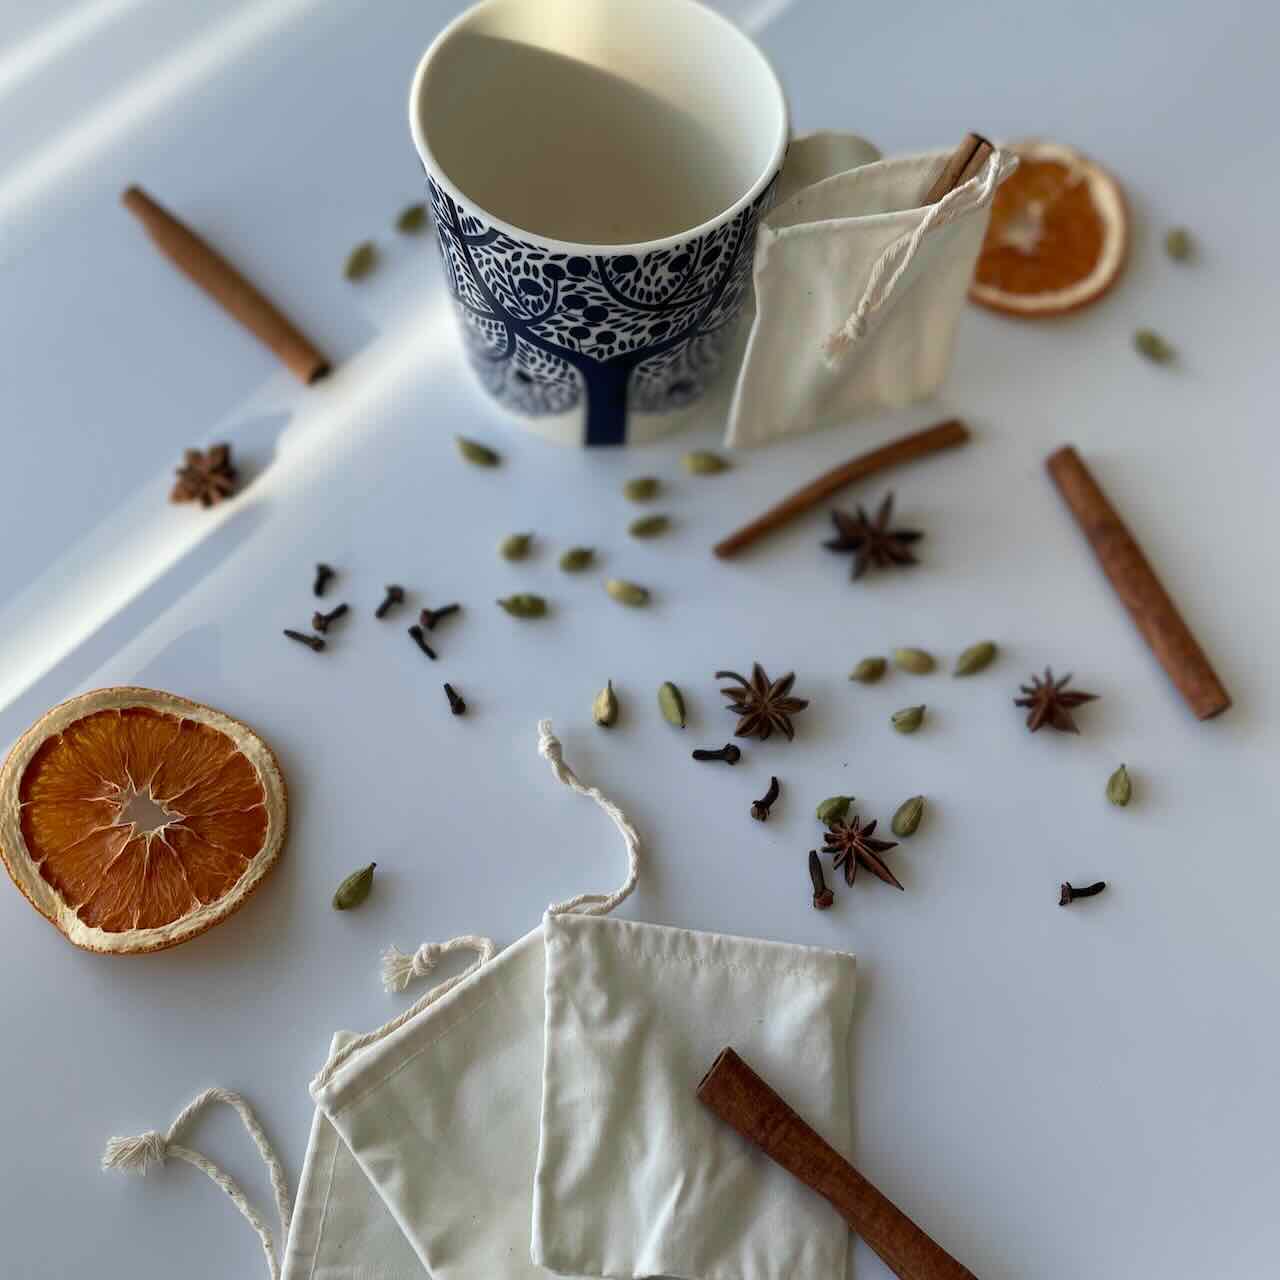 reusable muslin tea bags lay on top of a white table with tea mug, spices and dried orange slices scattered around them